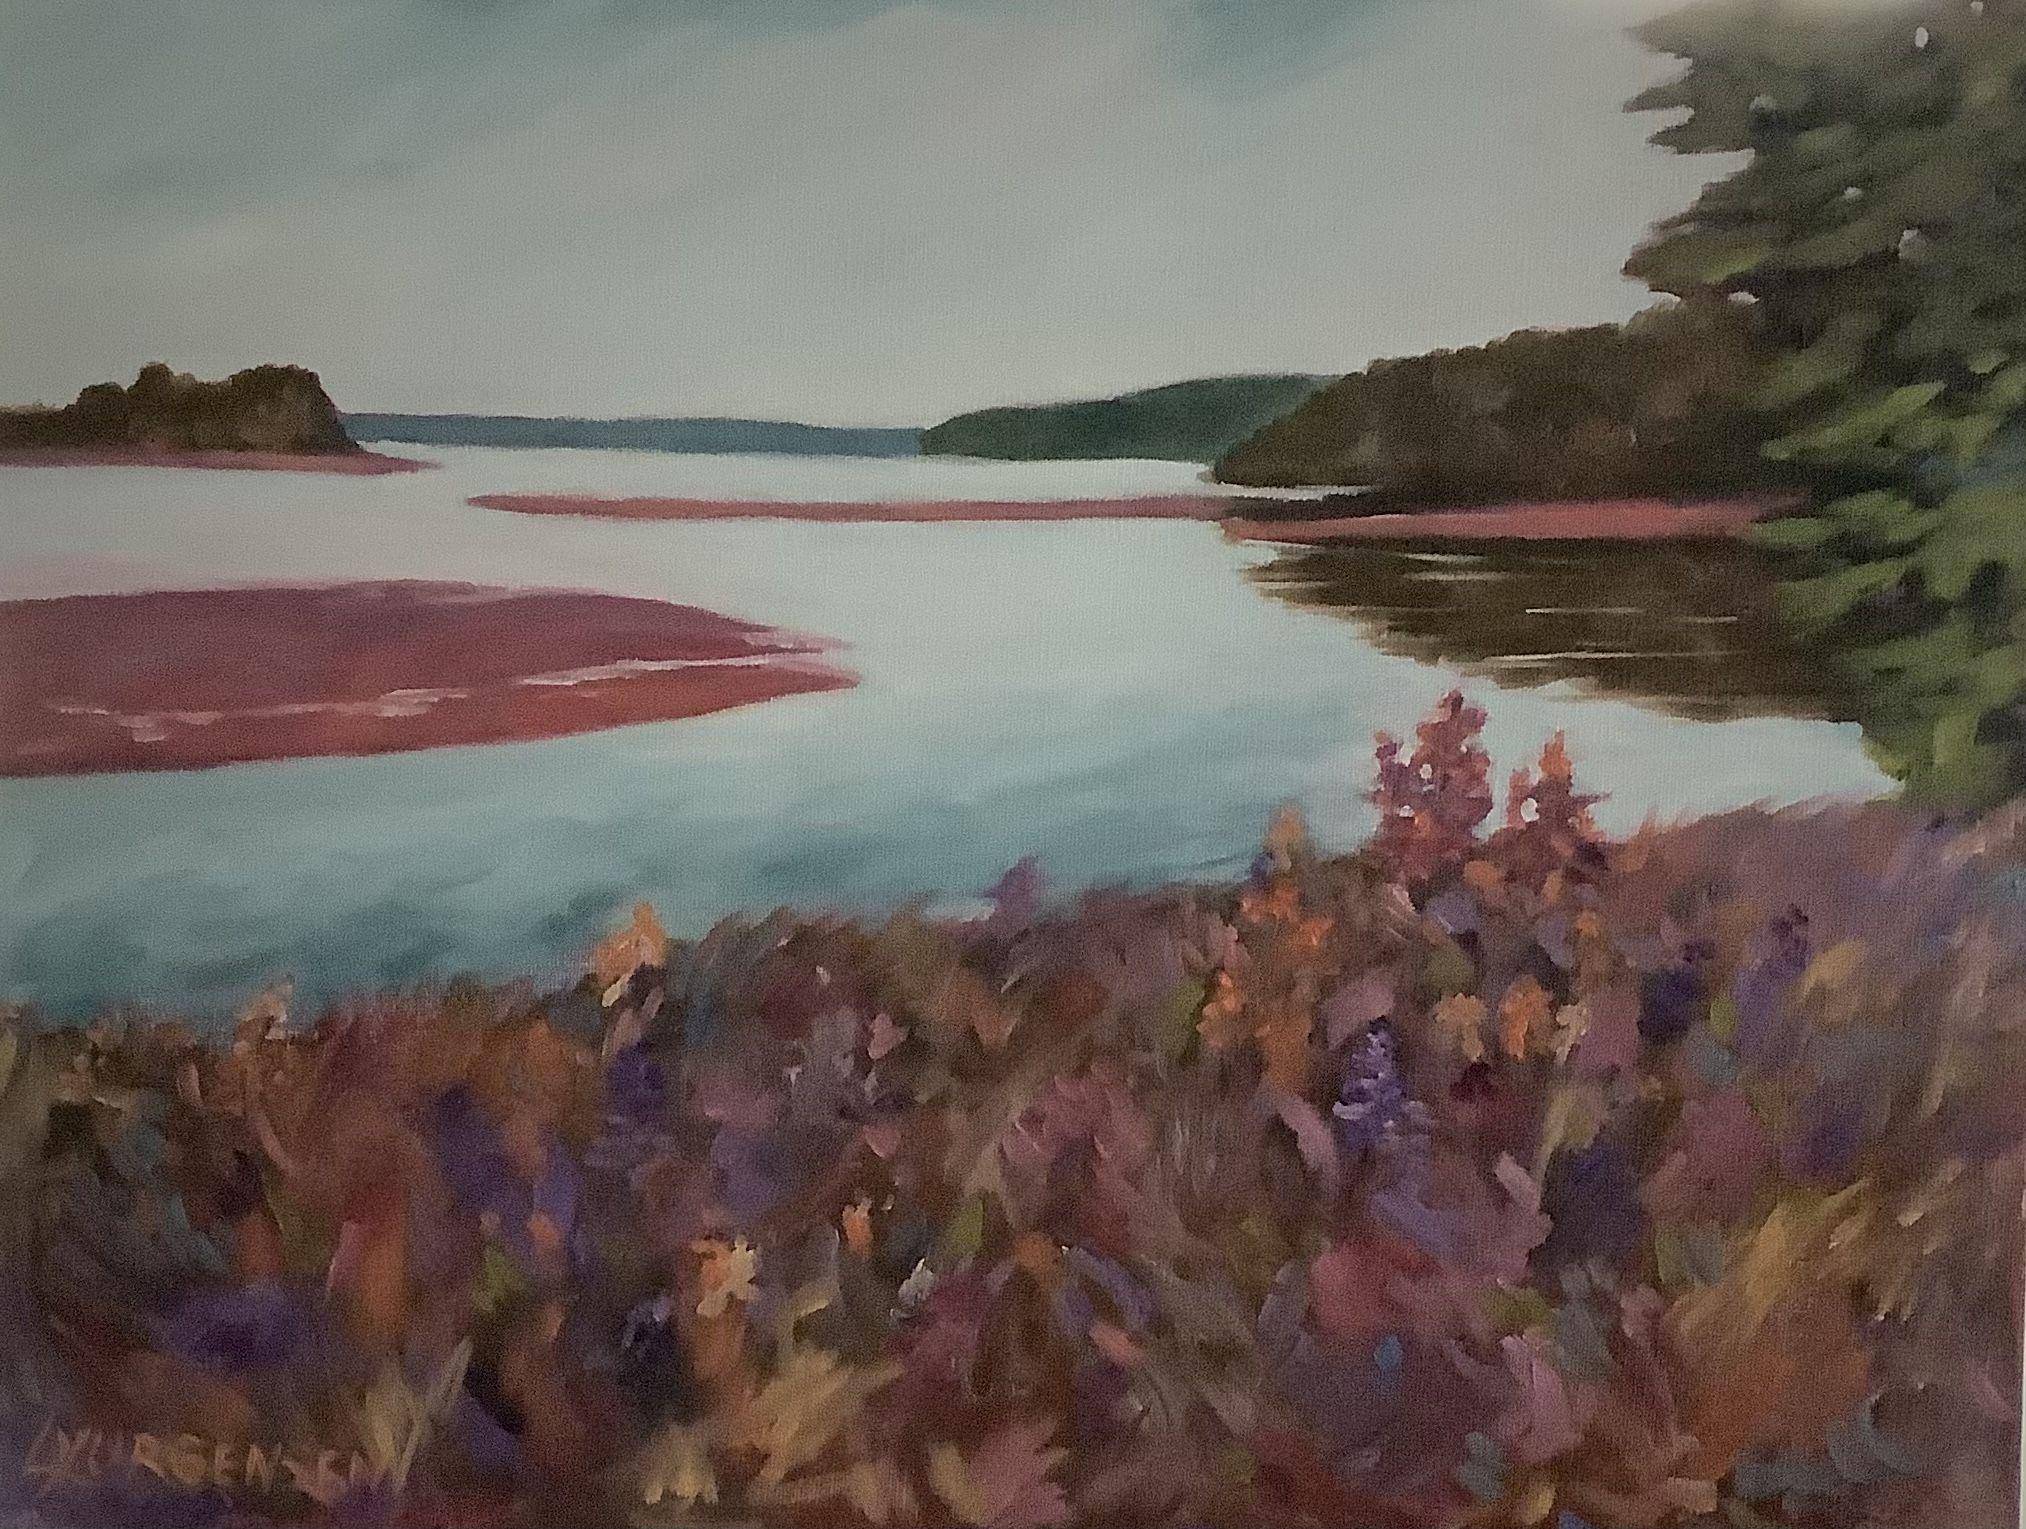 I did an artist residency in Parrsboro, Nova Scotia in the summer and painted this scene many times.  This area sees 40ft tides on a regular basis.  It is quite spectacular. The sides of the slim profile canvas have been painted on this piece. ::